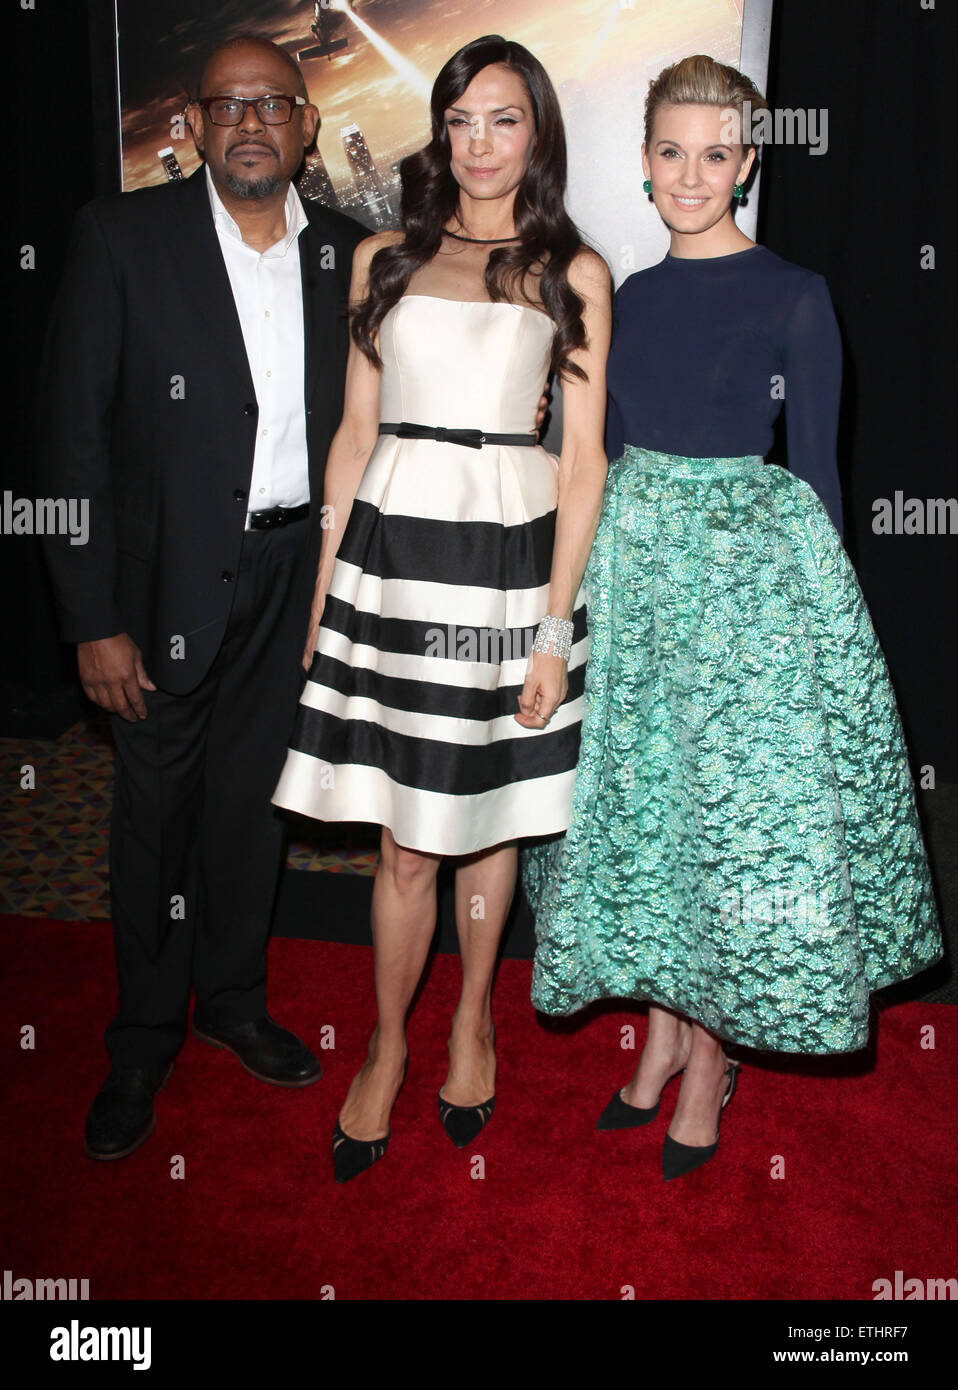 'Taken 3' fan event screening at AMC Empire 25 theater - Arrivals  Featuring: Forest Whitaker, Famke Janssen, Maggie Grace Where: New York City, New York, United States When: 07 Jan 2015 Credit: PNP/WENN.com Stock Photo